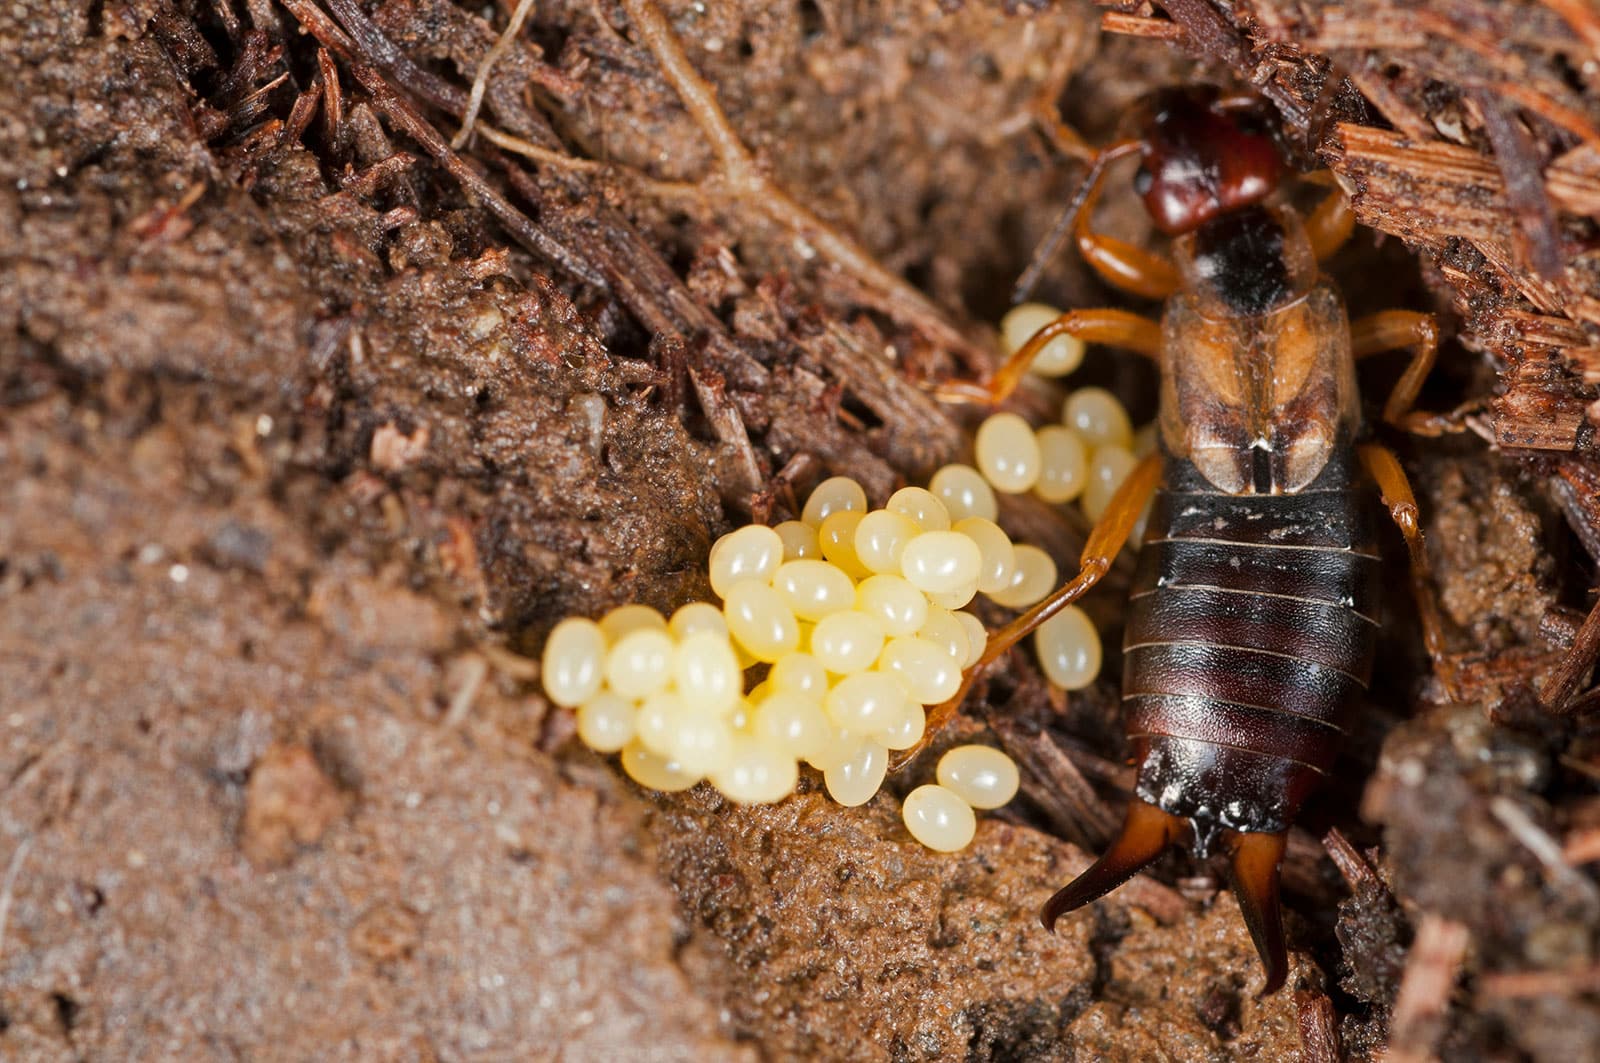 European earwig in her subterranean nest with a batch of small cream-colored eggs